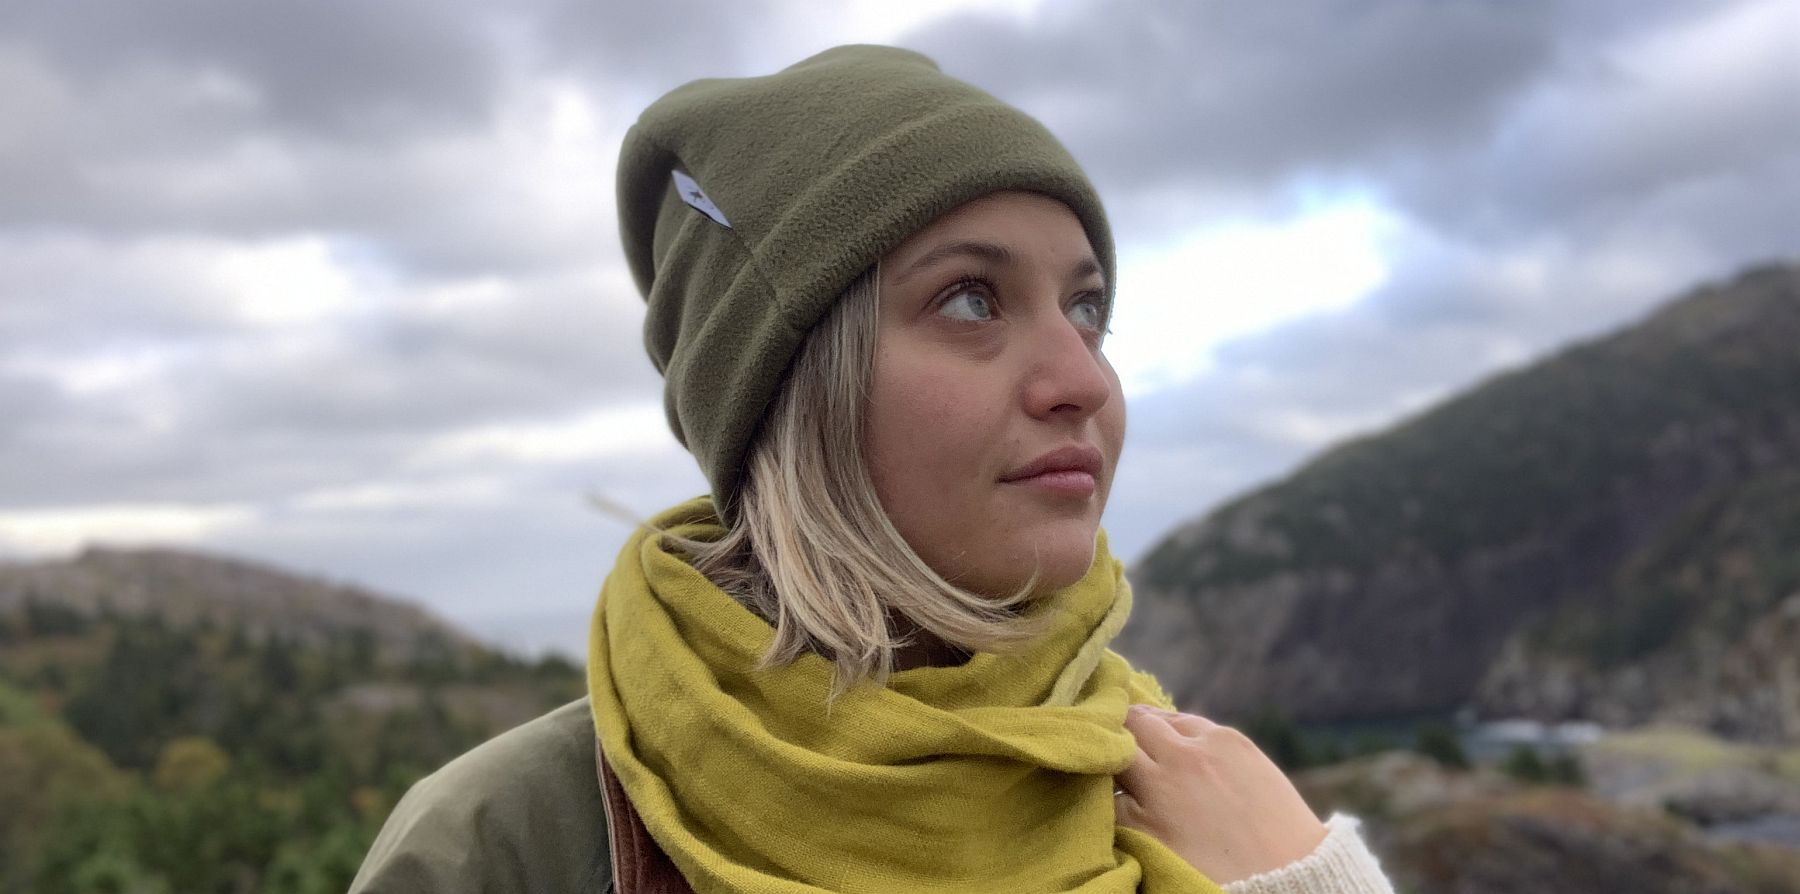 Polartec Classic 200 Series Fleece Toque paired with a linen-wool scarf. Made by puffin Gear in Canada-Trinity Newfoundland.